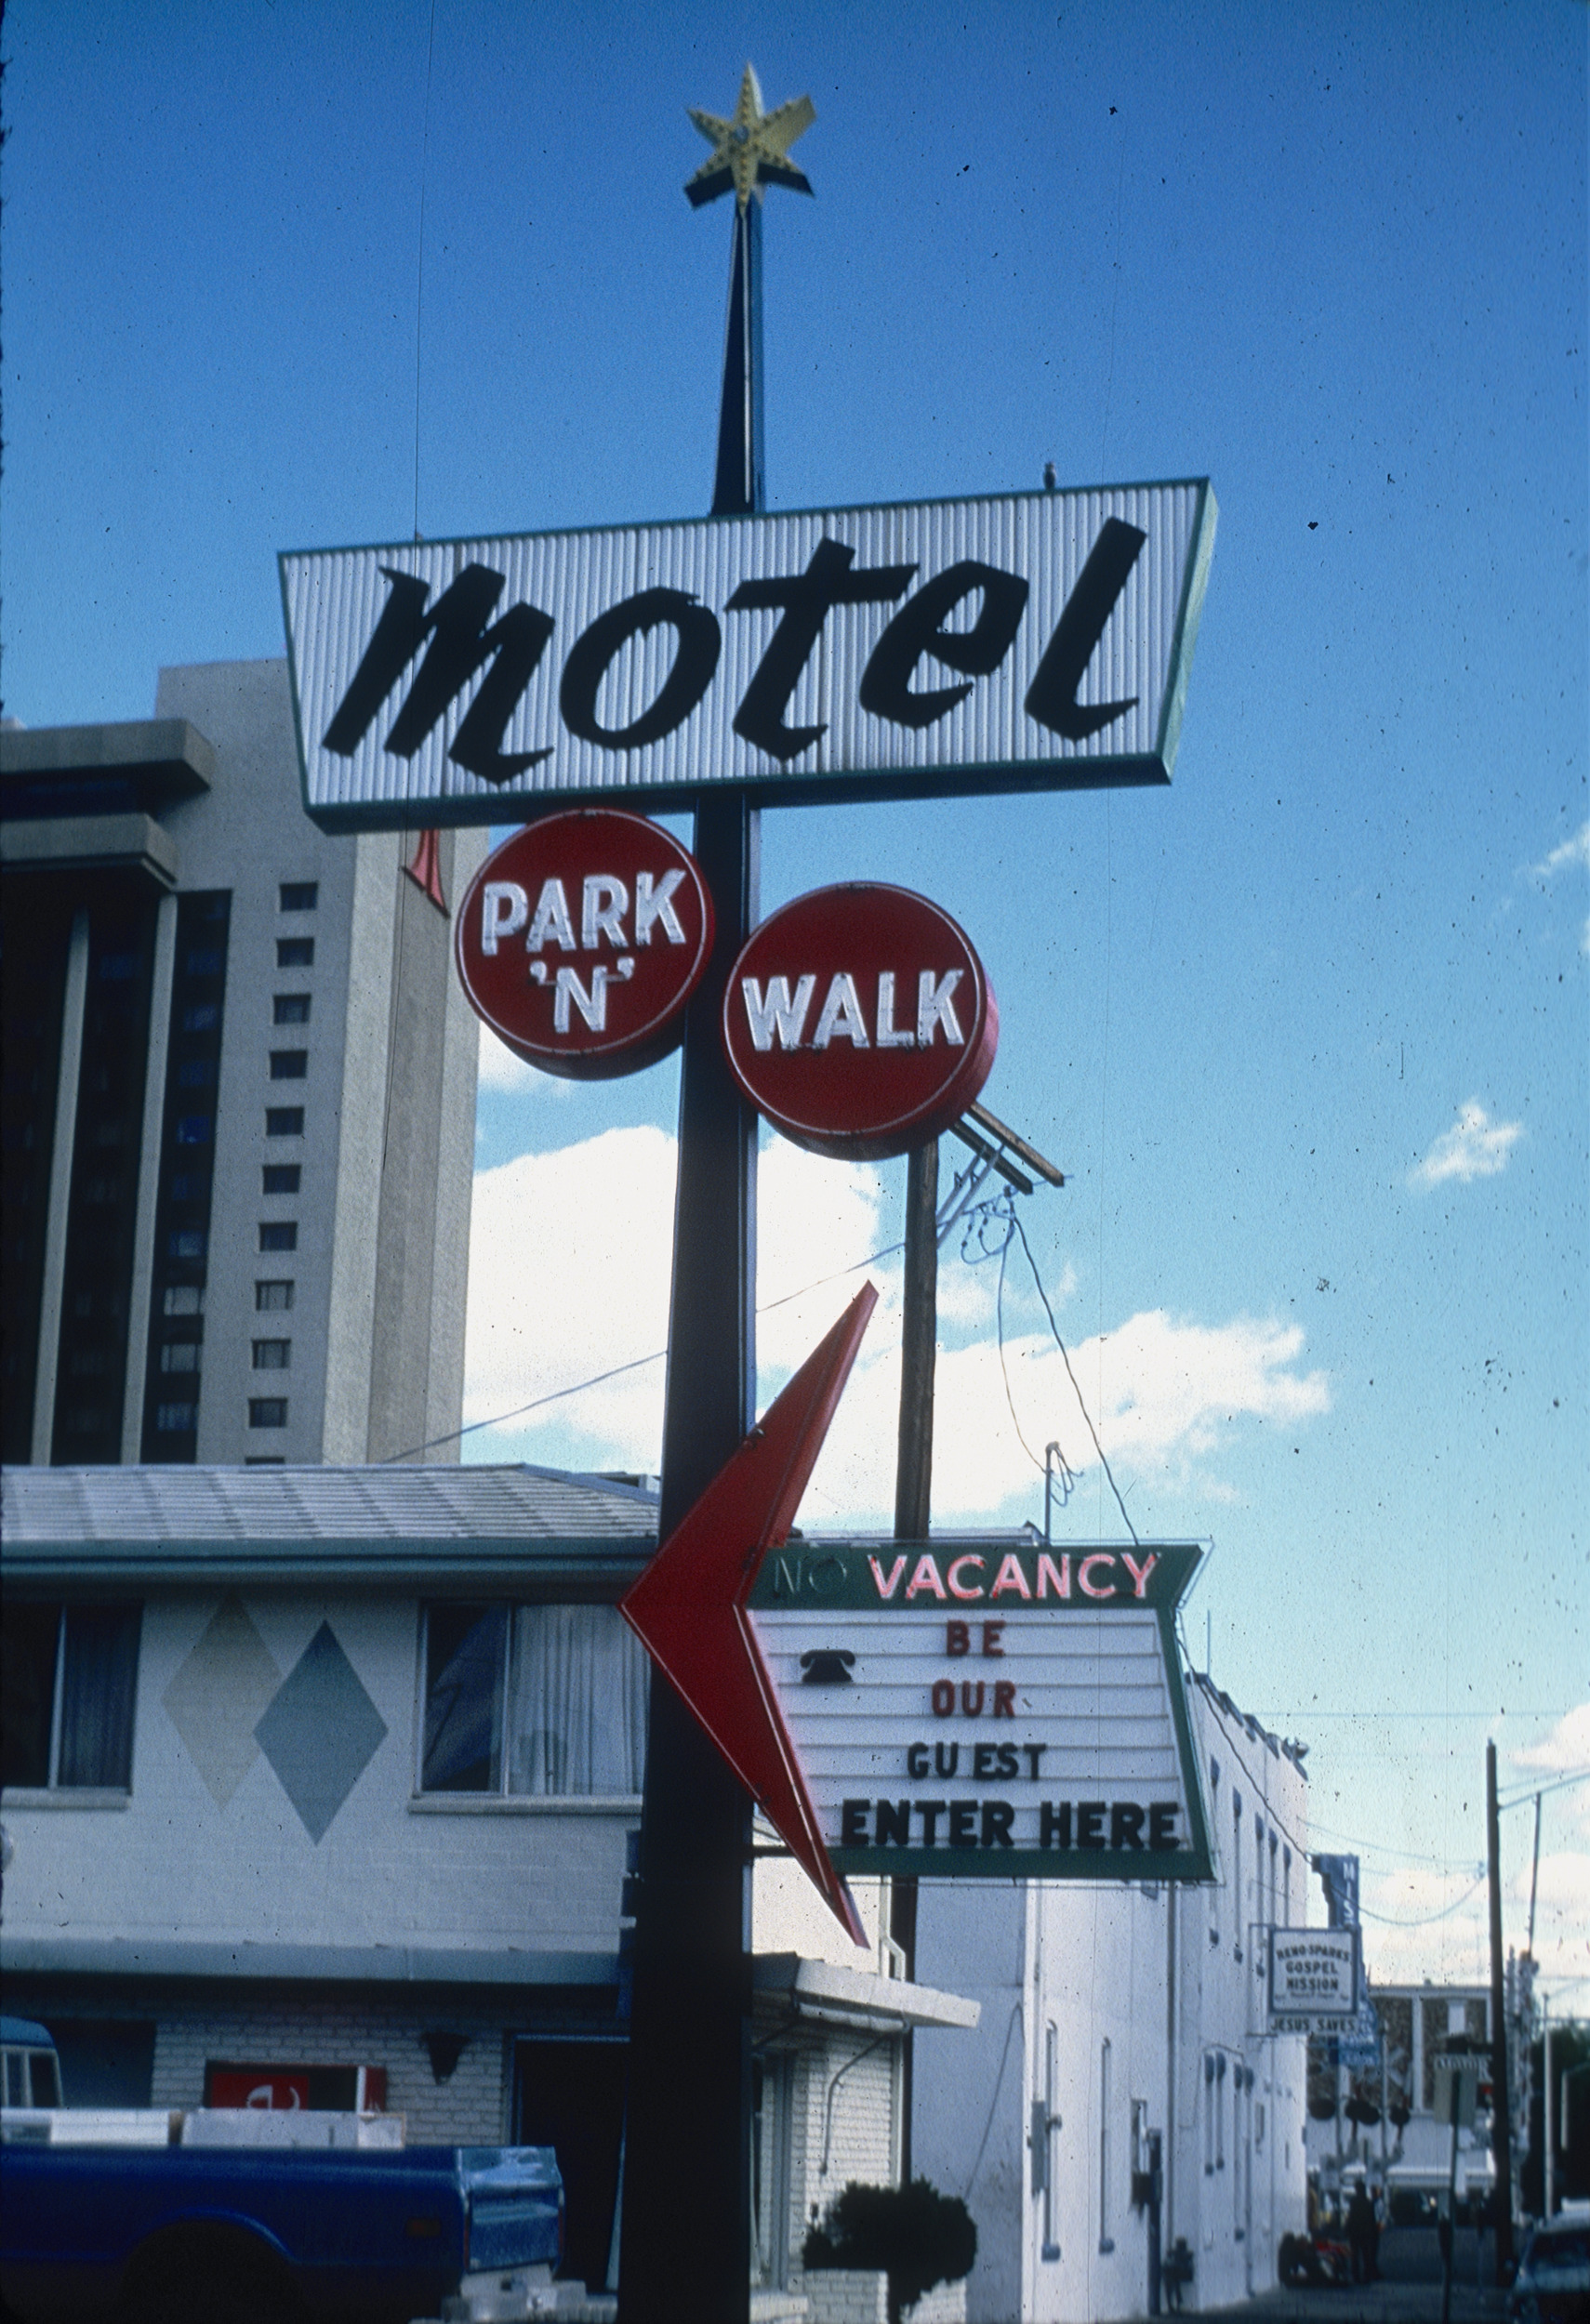 Slide of the neon sign for the Park-N-Walk Motel, Reno, Nevada, 1986